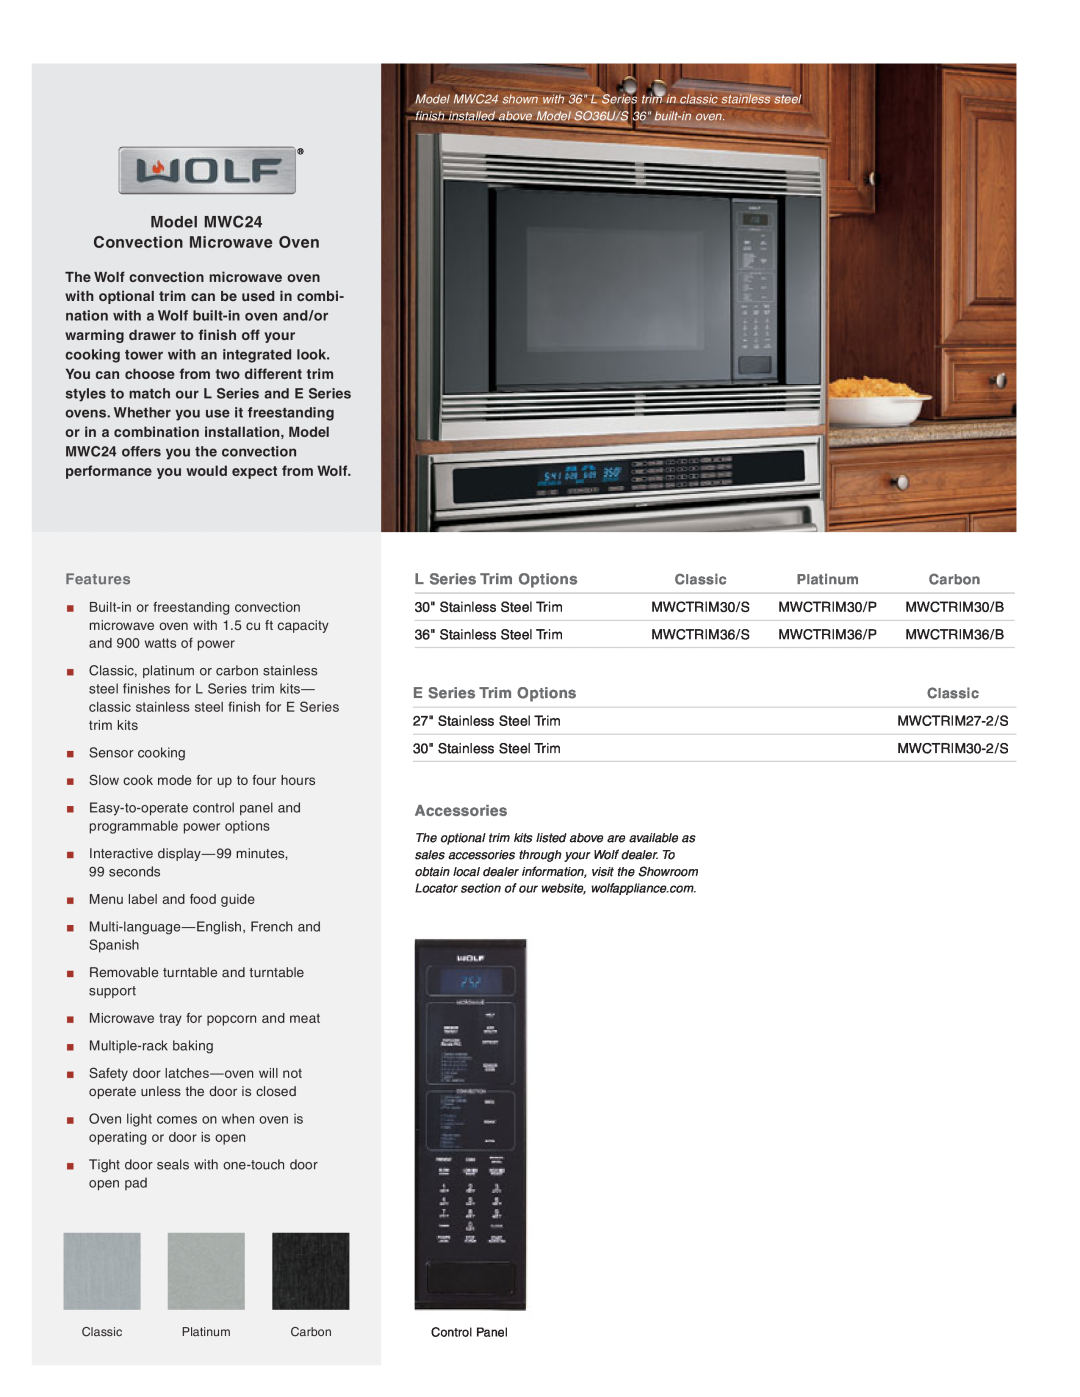 Wolf manual Model MWC24 Convection Microwave Oven, Features, L Series Trim Options, E Series Trim Options, Classic 